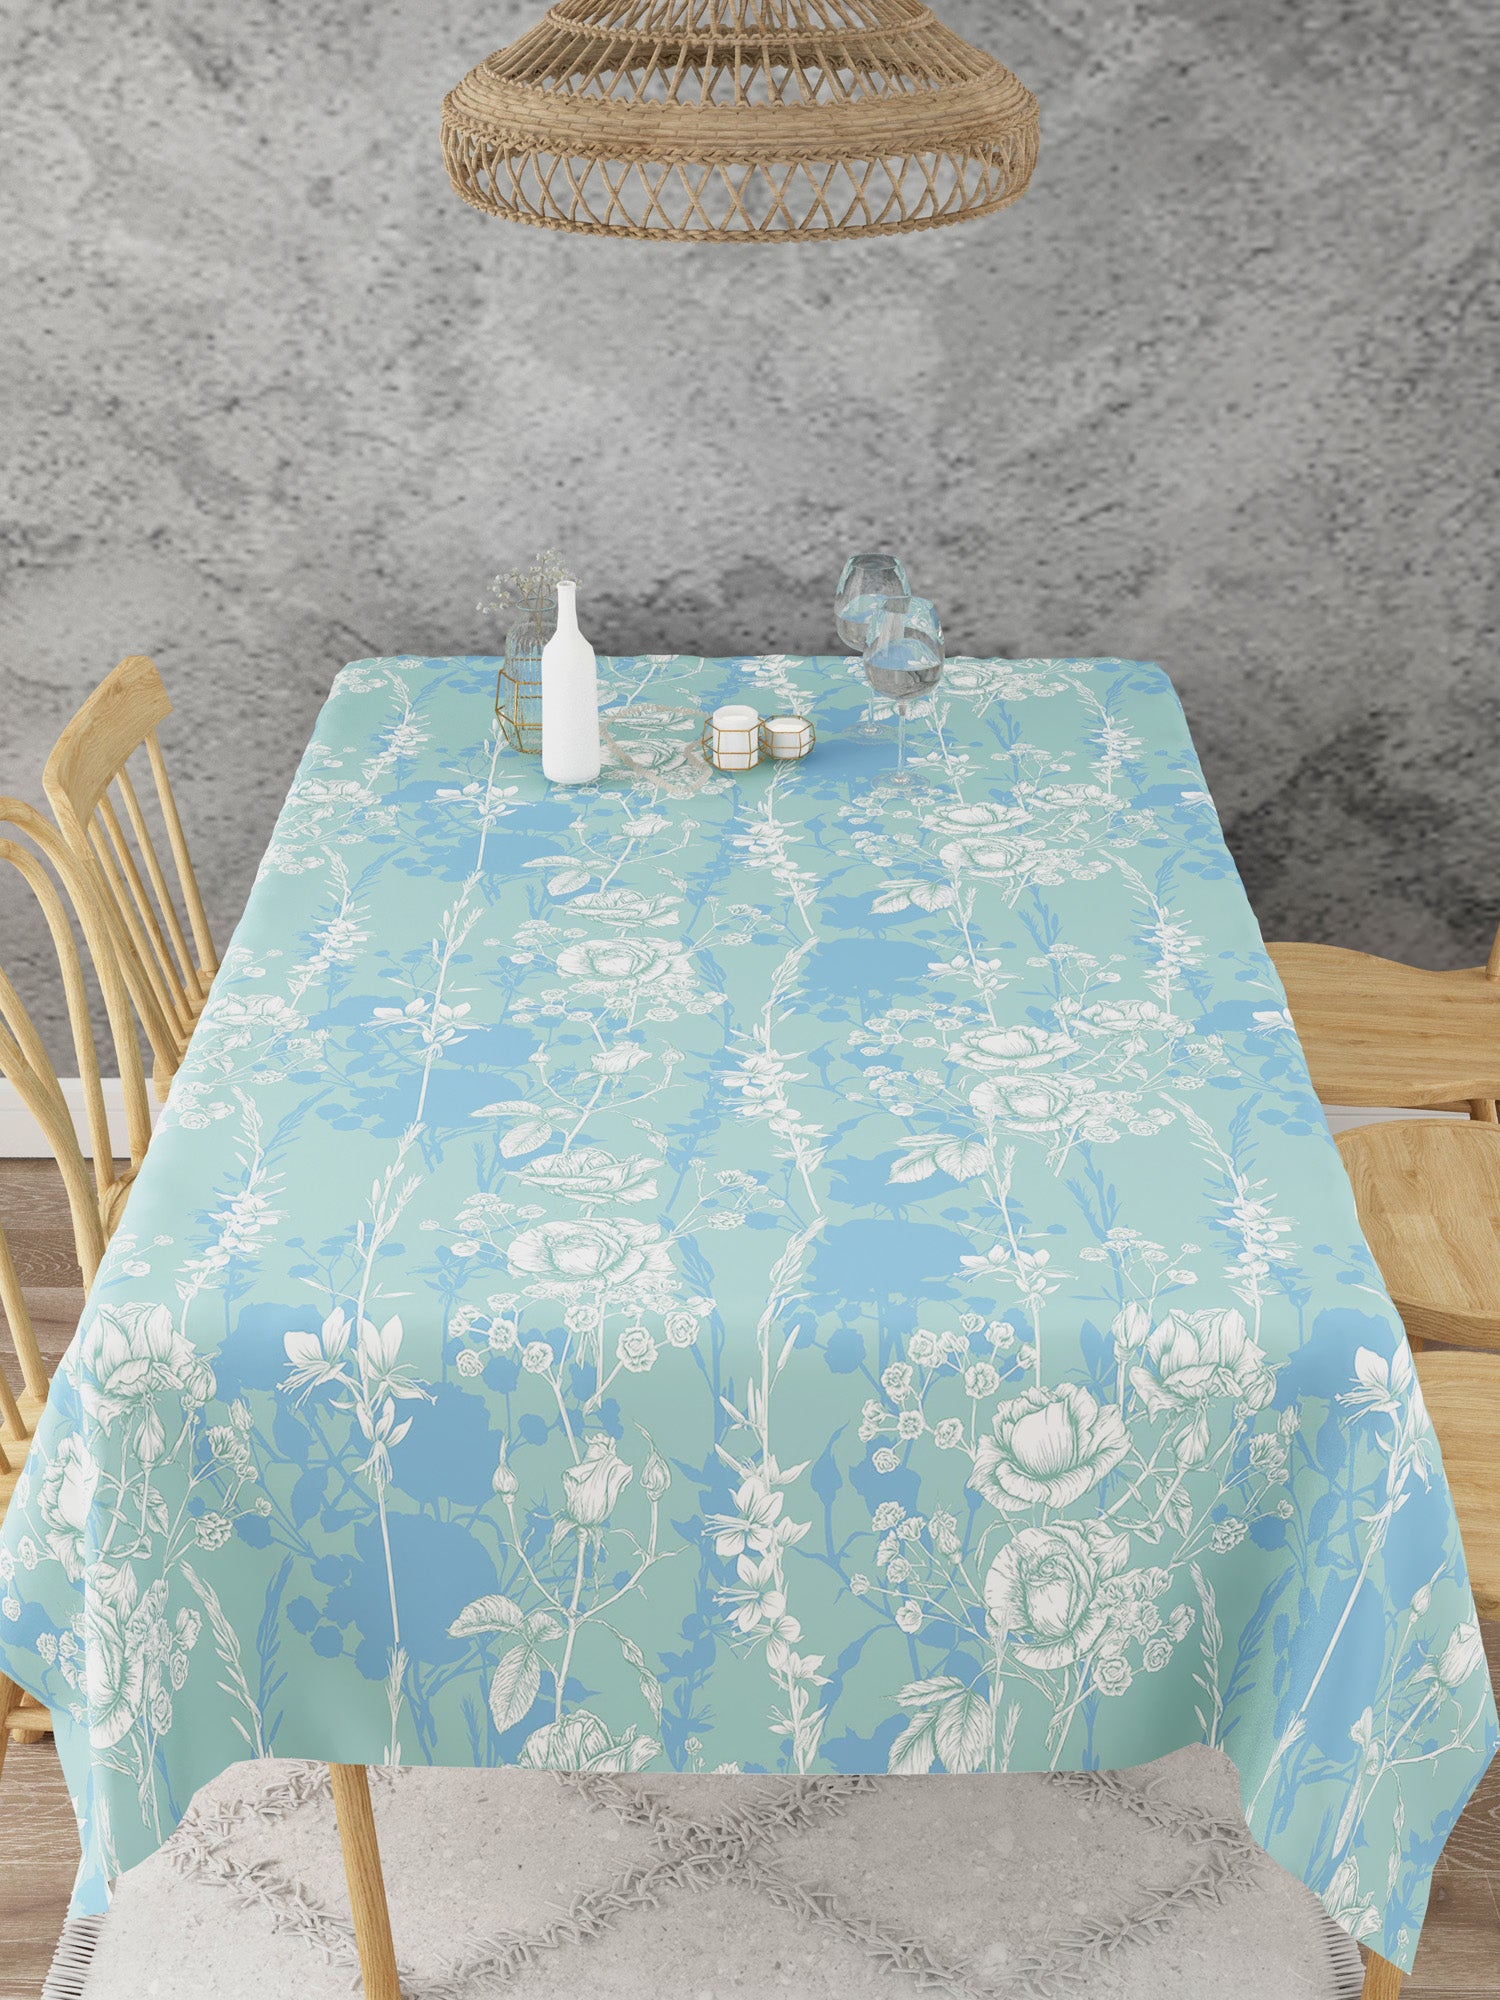 Floral Print Blue Table Cover